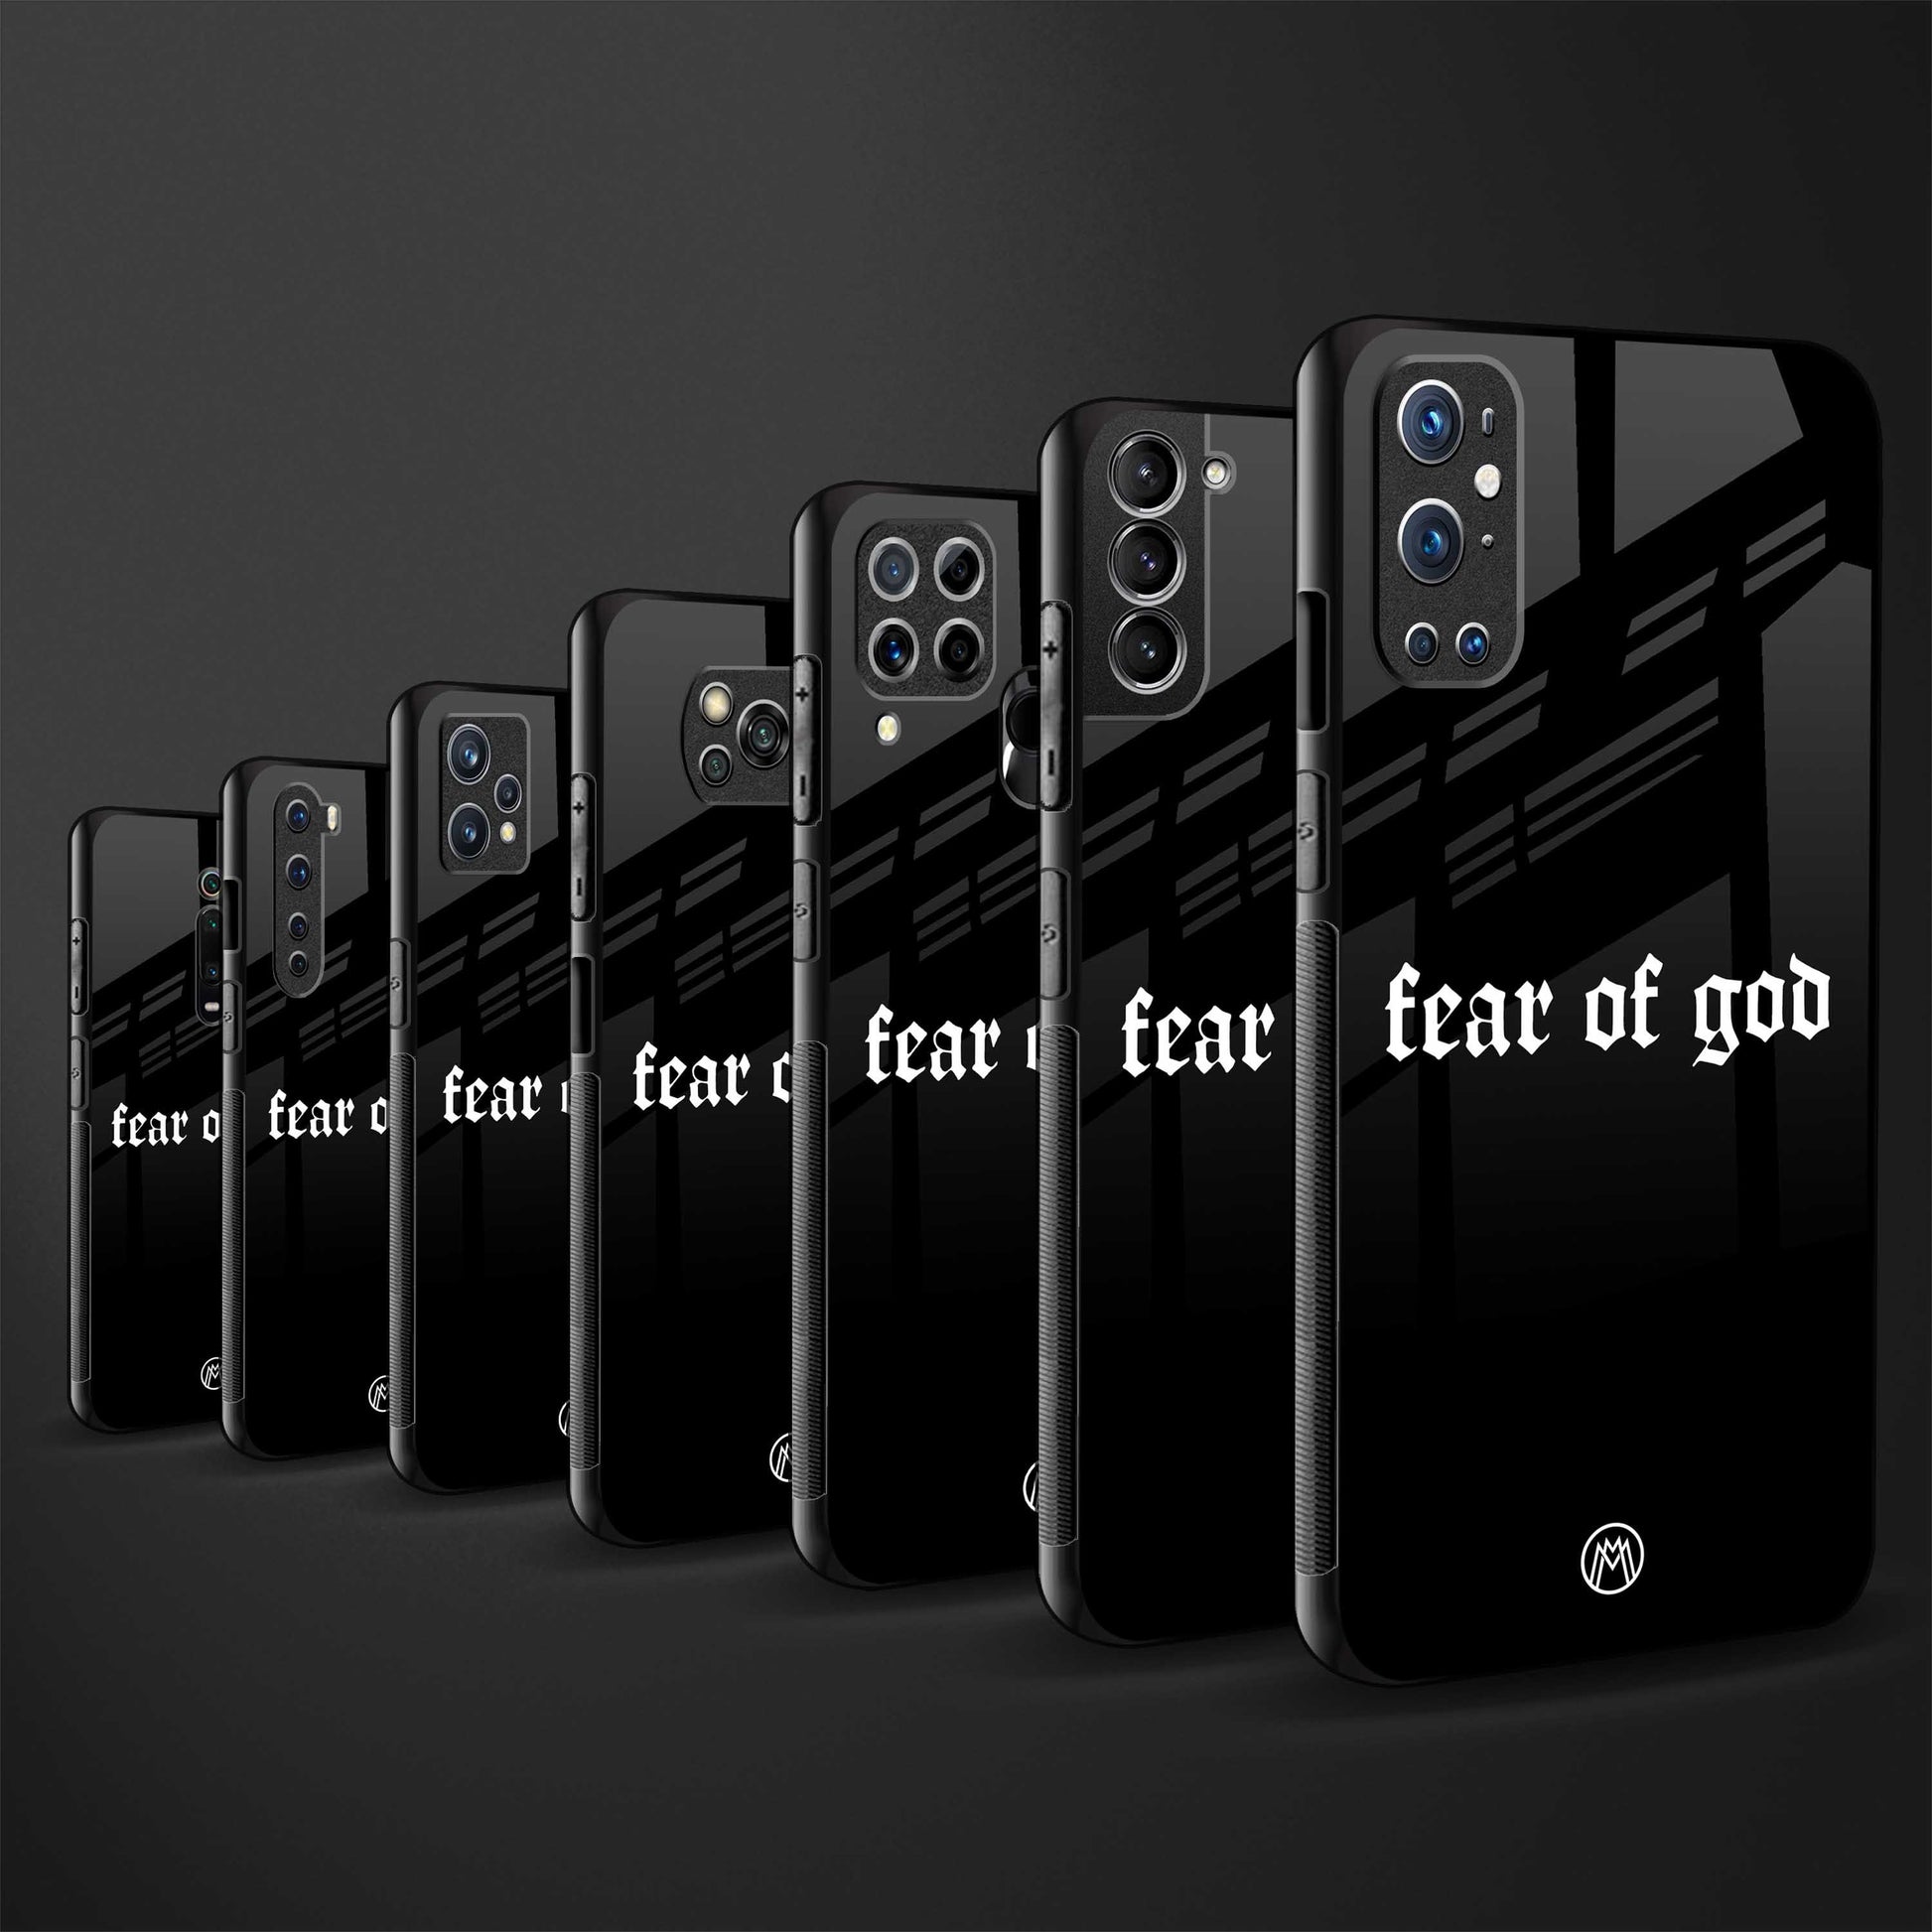 fear of god phone cover for oneplus 7t